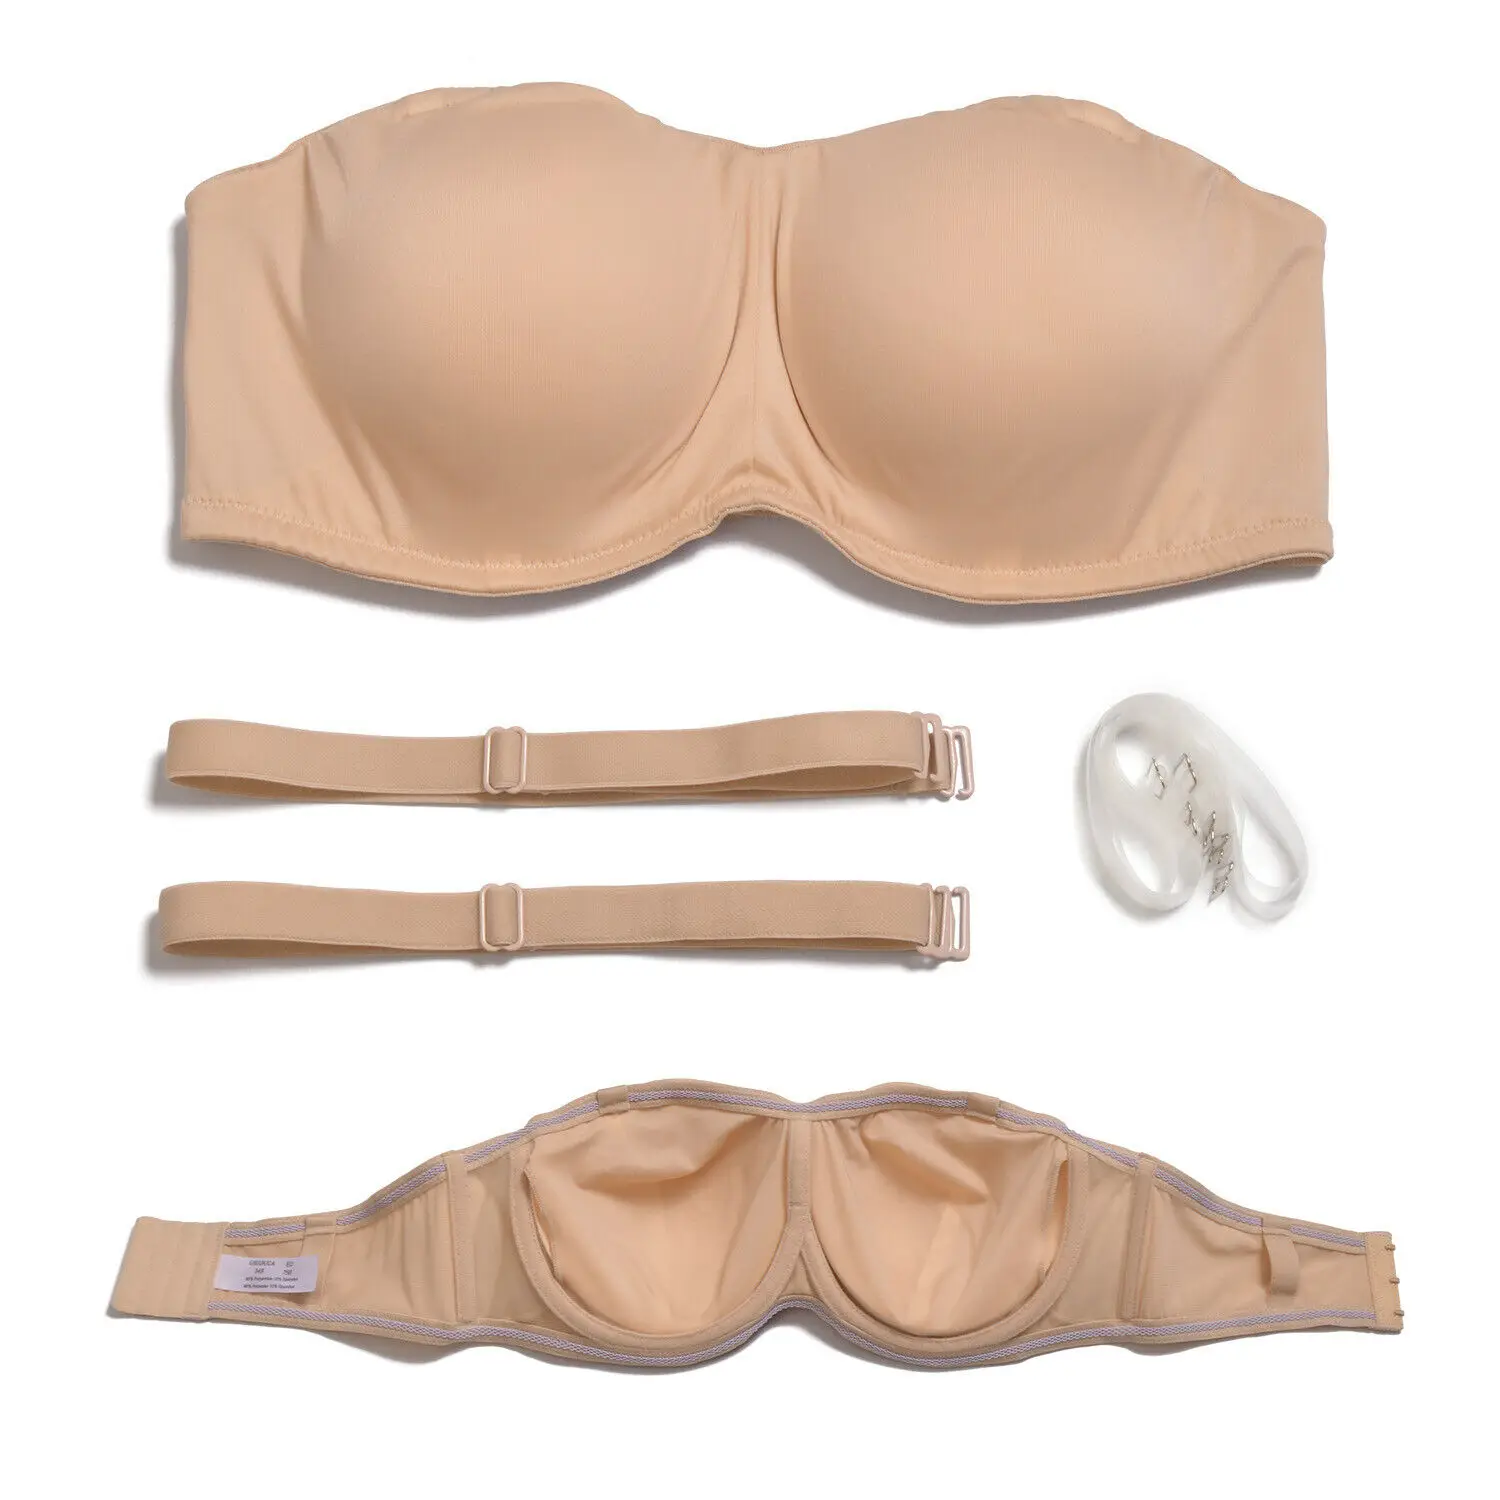 

New Ladies Sexy Strapless Bras Women Bra Adjusted Convertible Straps A B C D DD DDD E F G Cups 32 34 36 38 40 42 44 46 48 Size